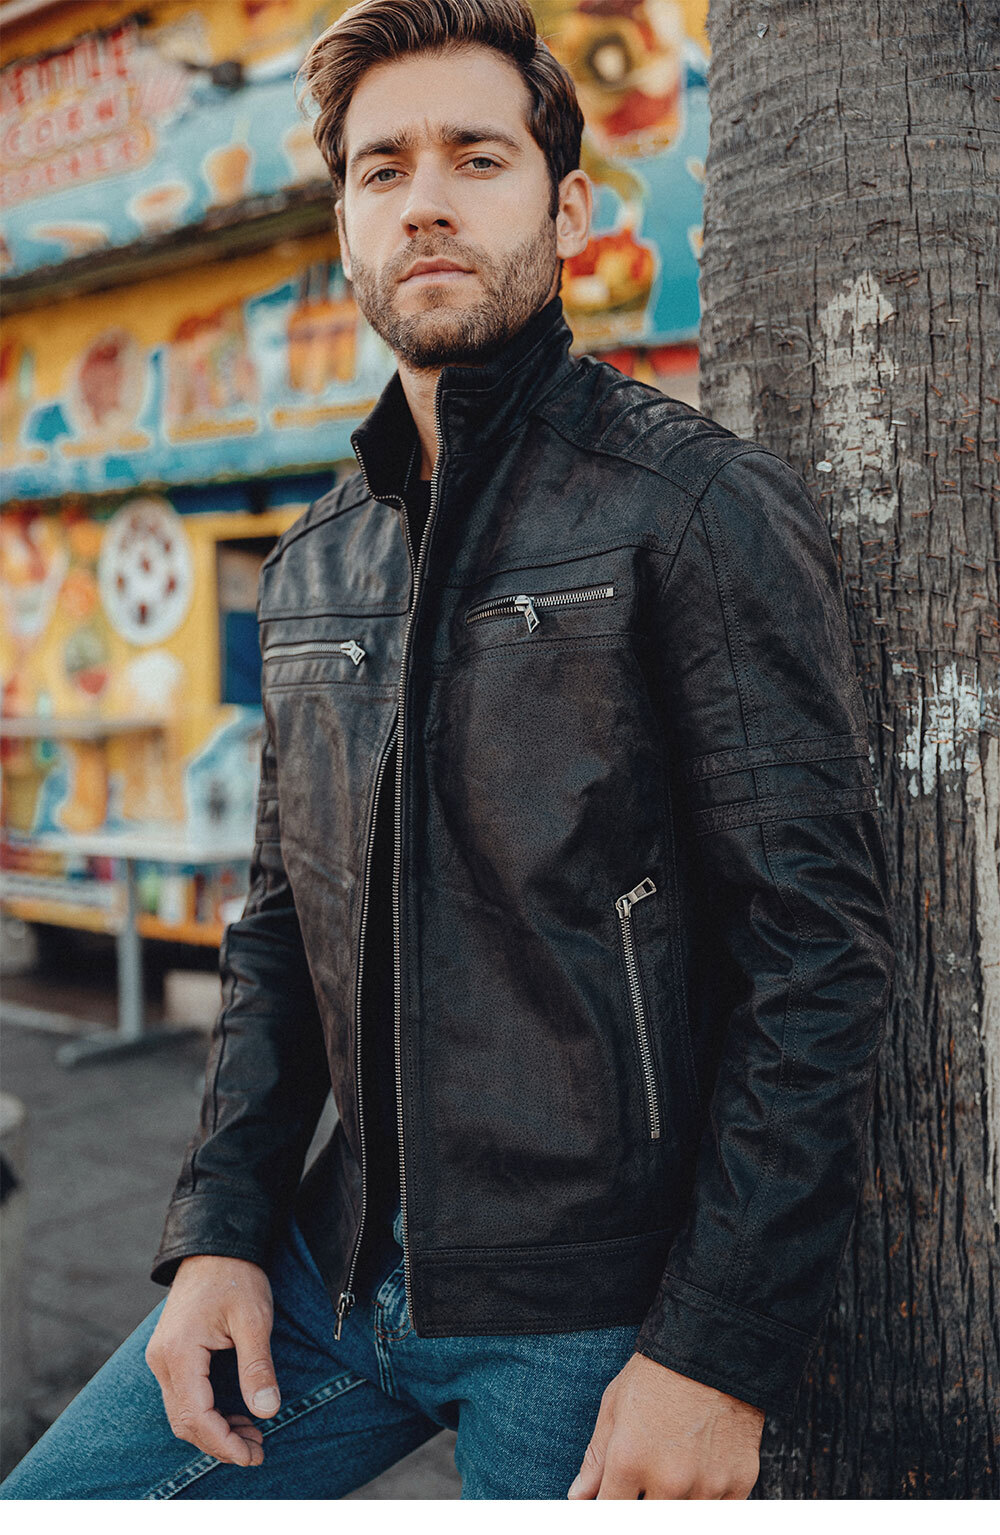 New Men's Real Leather Causal Jacket with Genuine Pigskin Leather Men Motorcycle Leather Coat MXGX20-5 